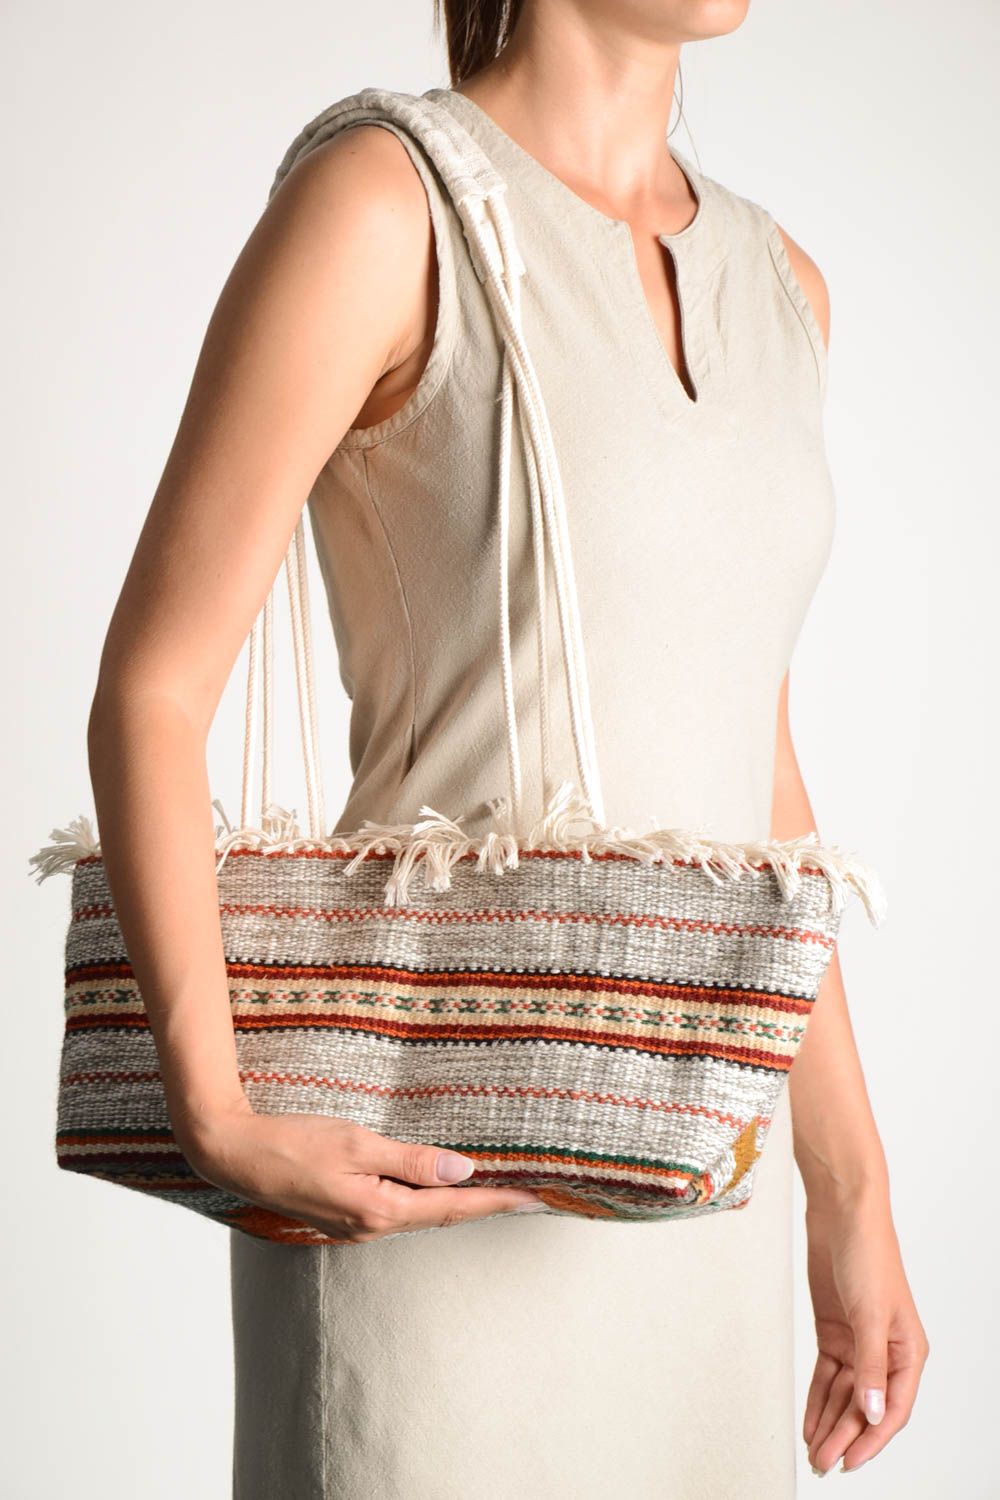 Ethnic bag linen bags with embroidery handmade summer bags shoulder bags photo 1